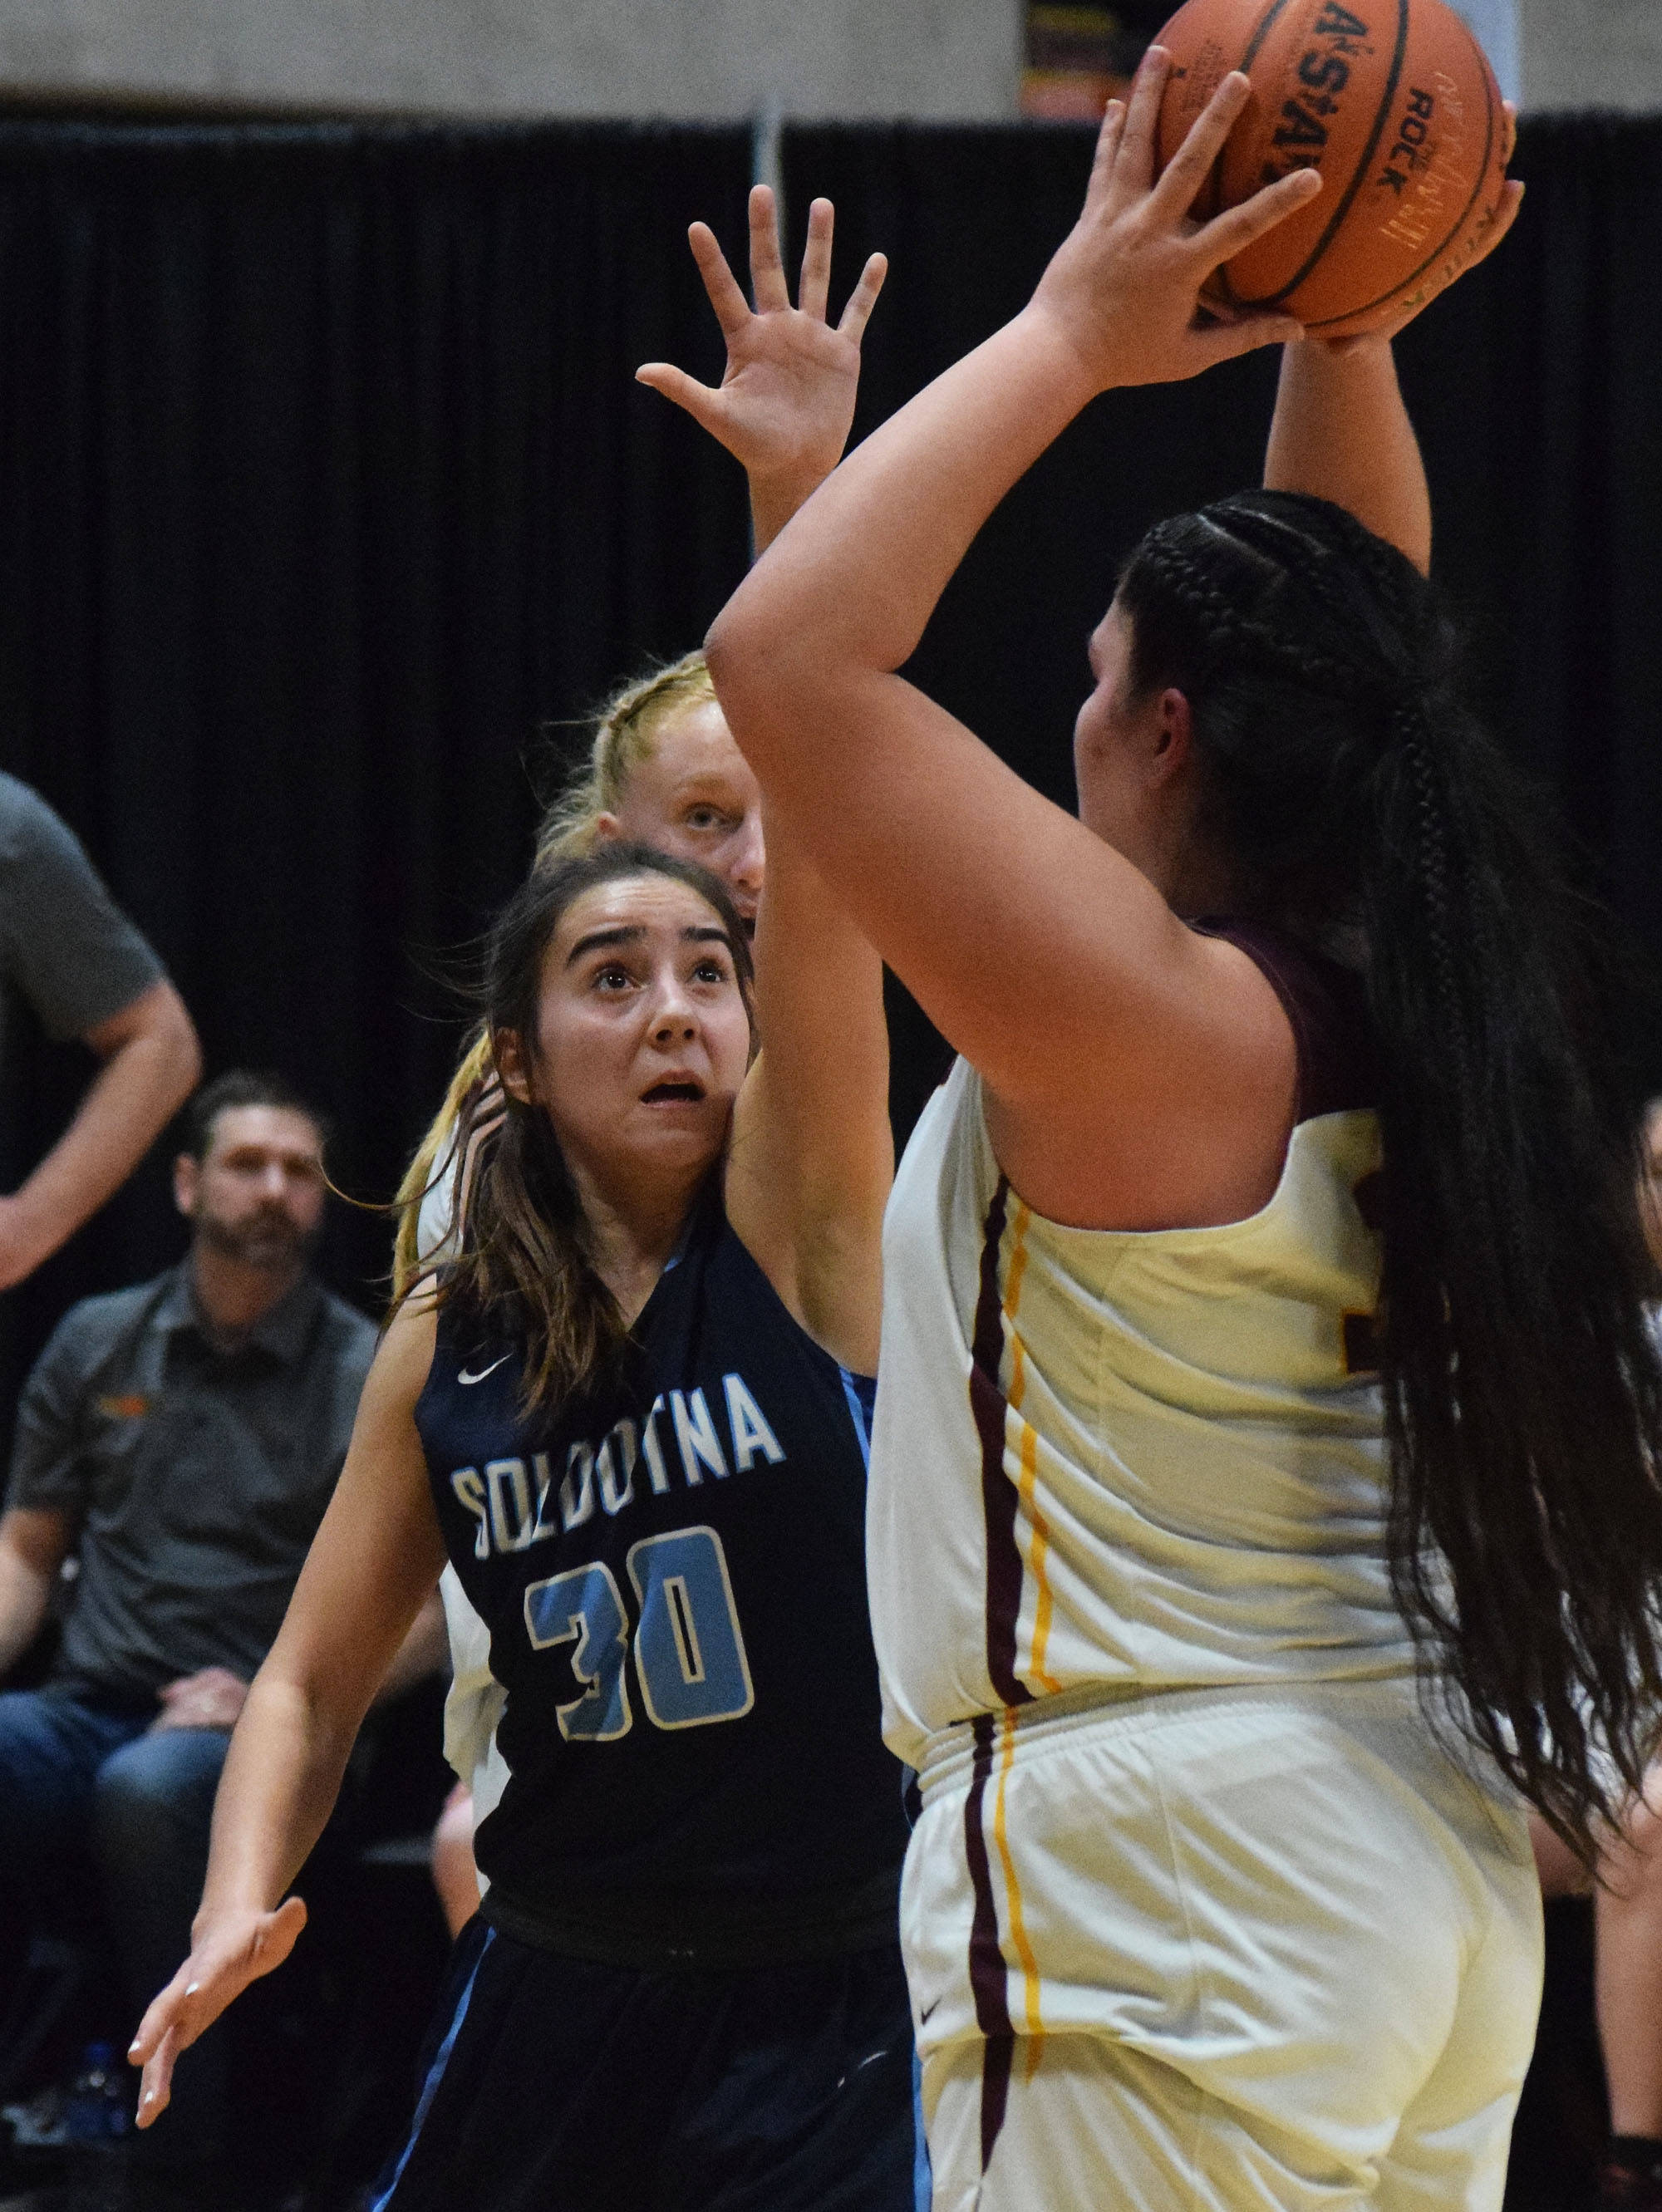 Soldotna’s Drysta Crosby-Schneider (30) puts up a block against Dimond’s Alissa Pili on March 22 in the Class 4A state basketball tournament at the Alaska Airlines Center in Anchorage. (Photo by Joey Klecka/Peninsula Clarion)